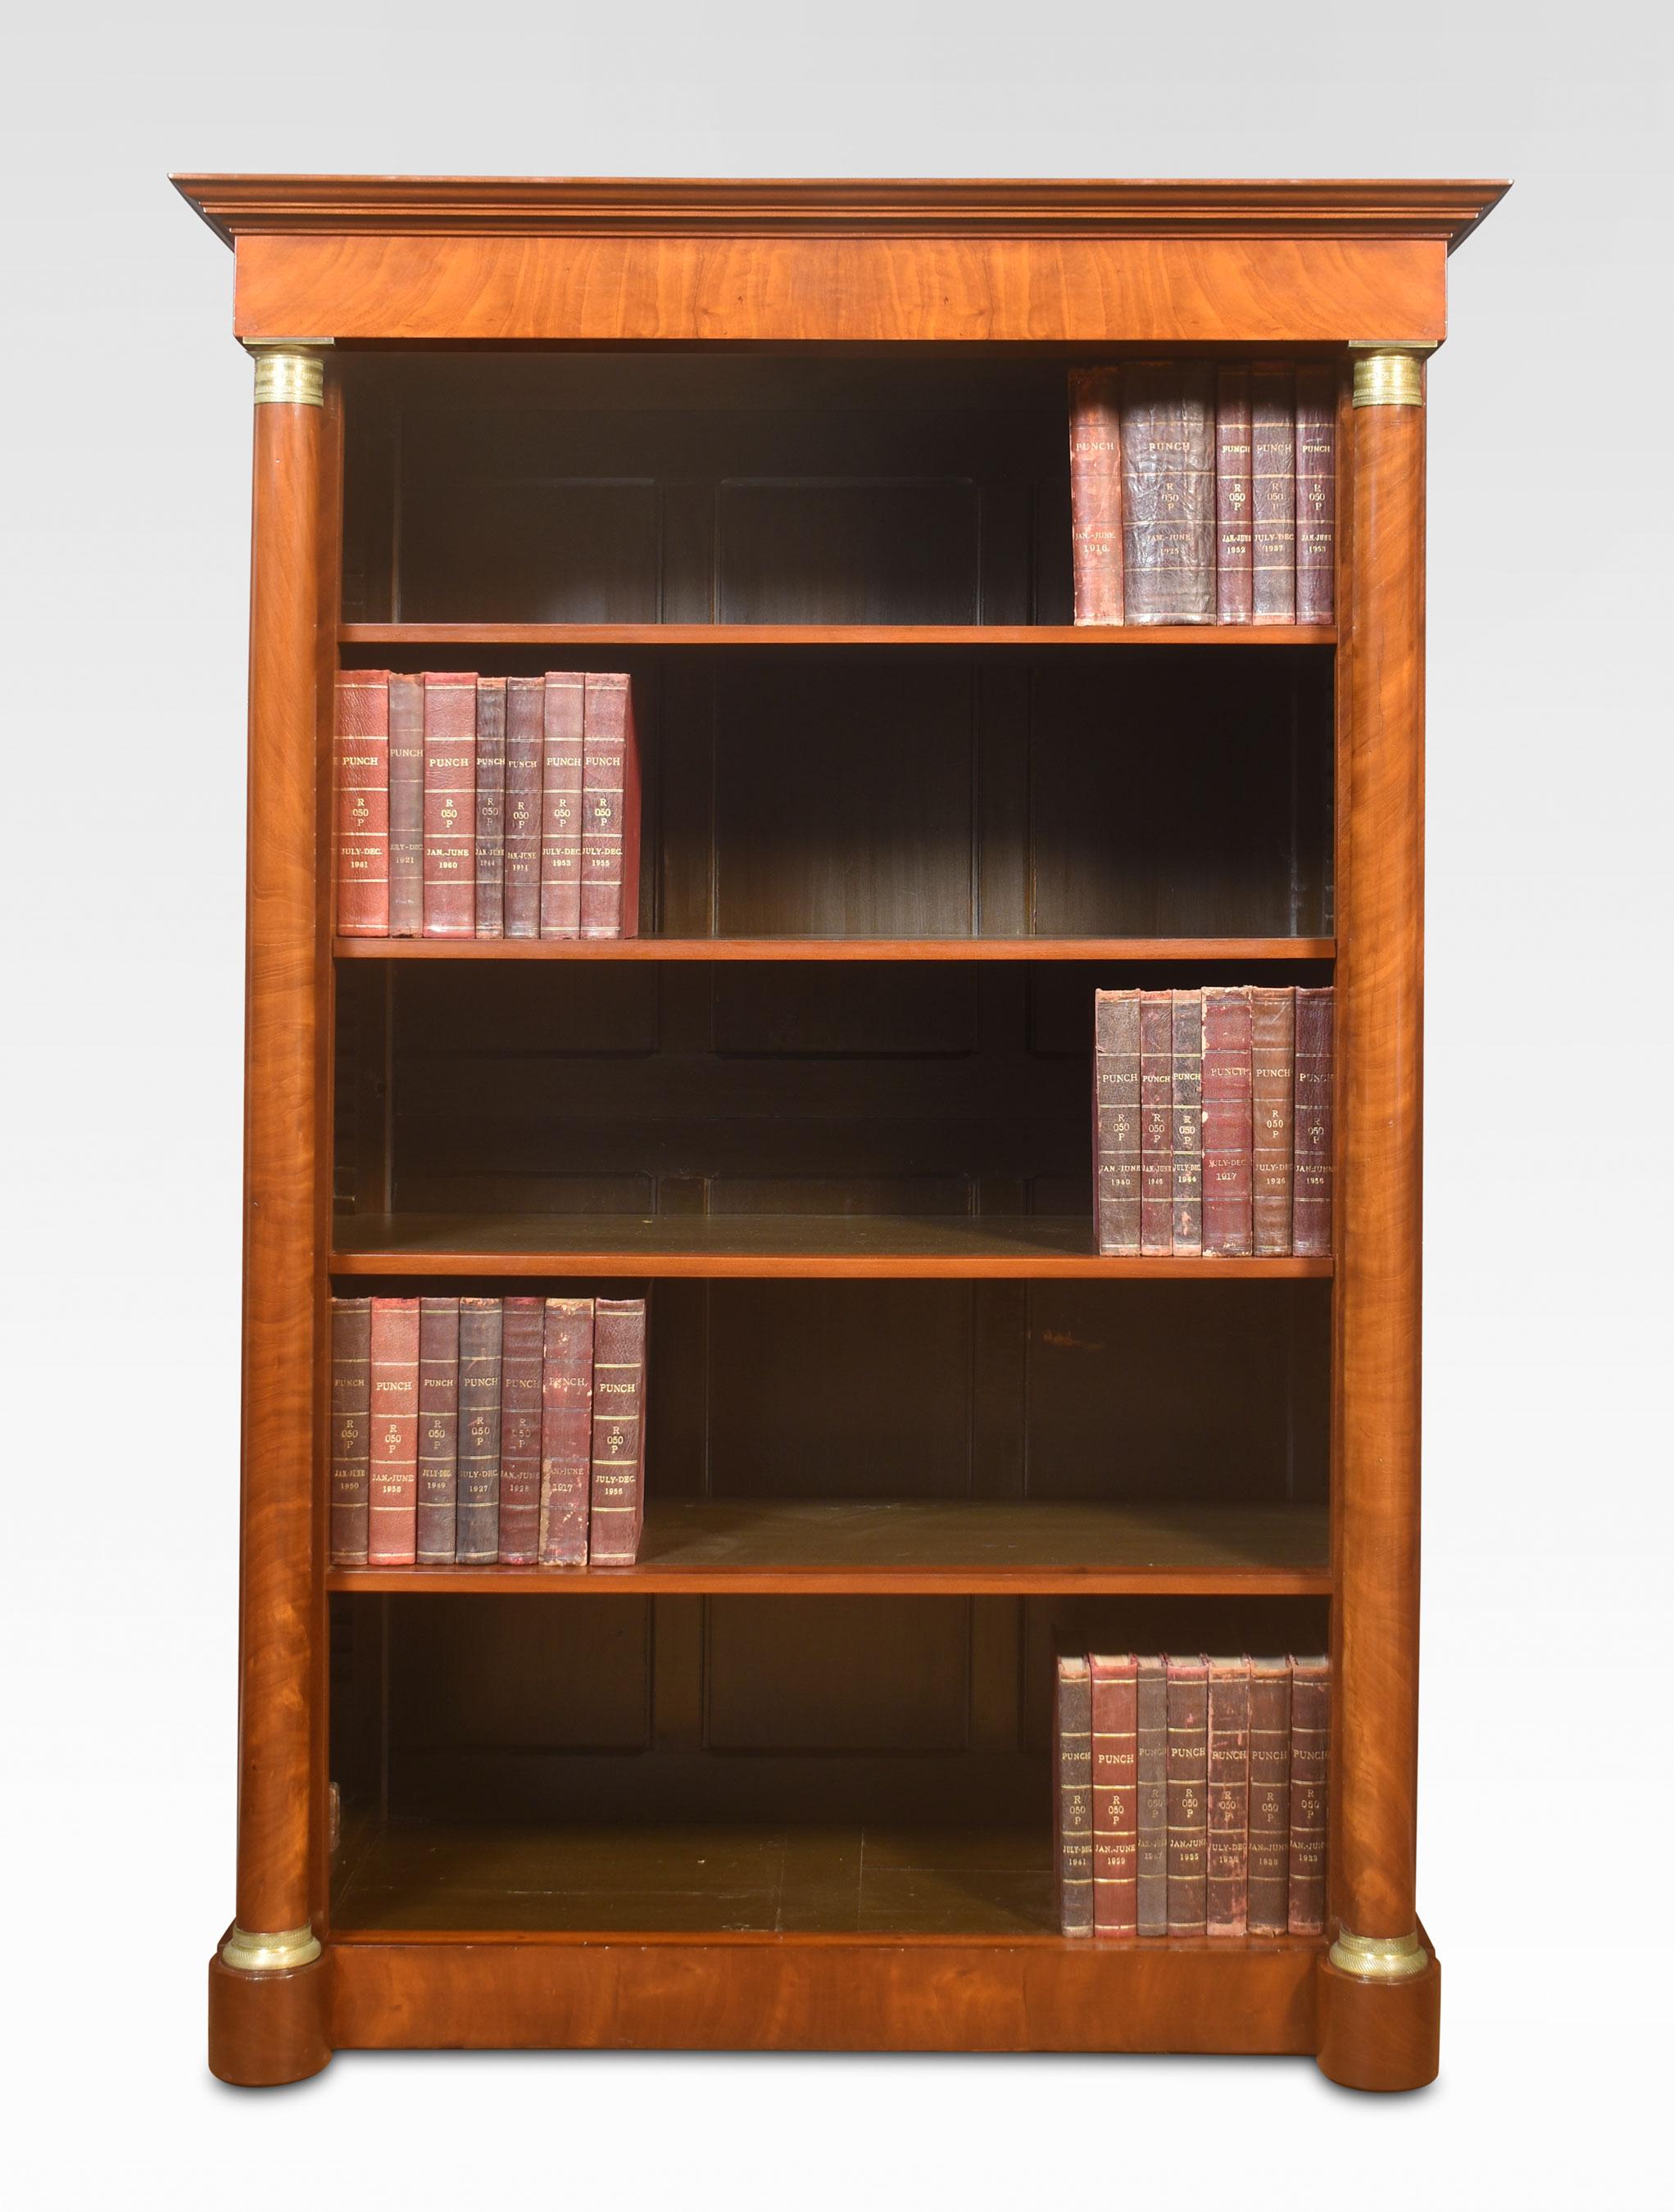 Large open bookcase the moulded cornice above large adjustable shelved interior flanked by circular columns with brass capitals, All raised up on plinth base. The bookcase will disassemble for easy transportation.
Dimensions
Height 77